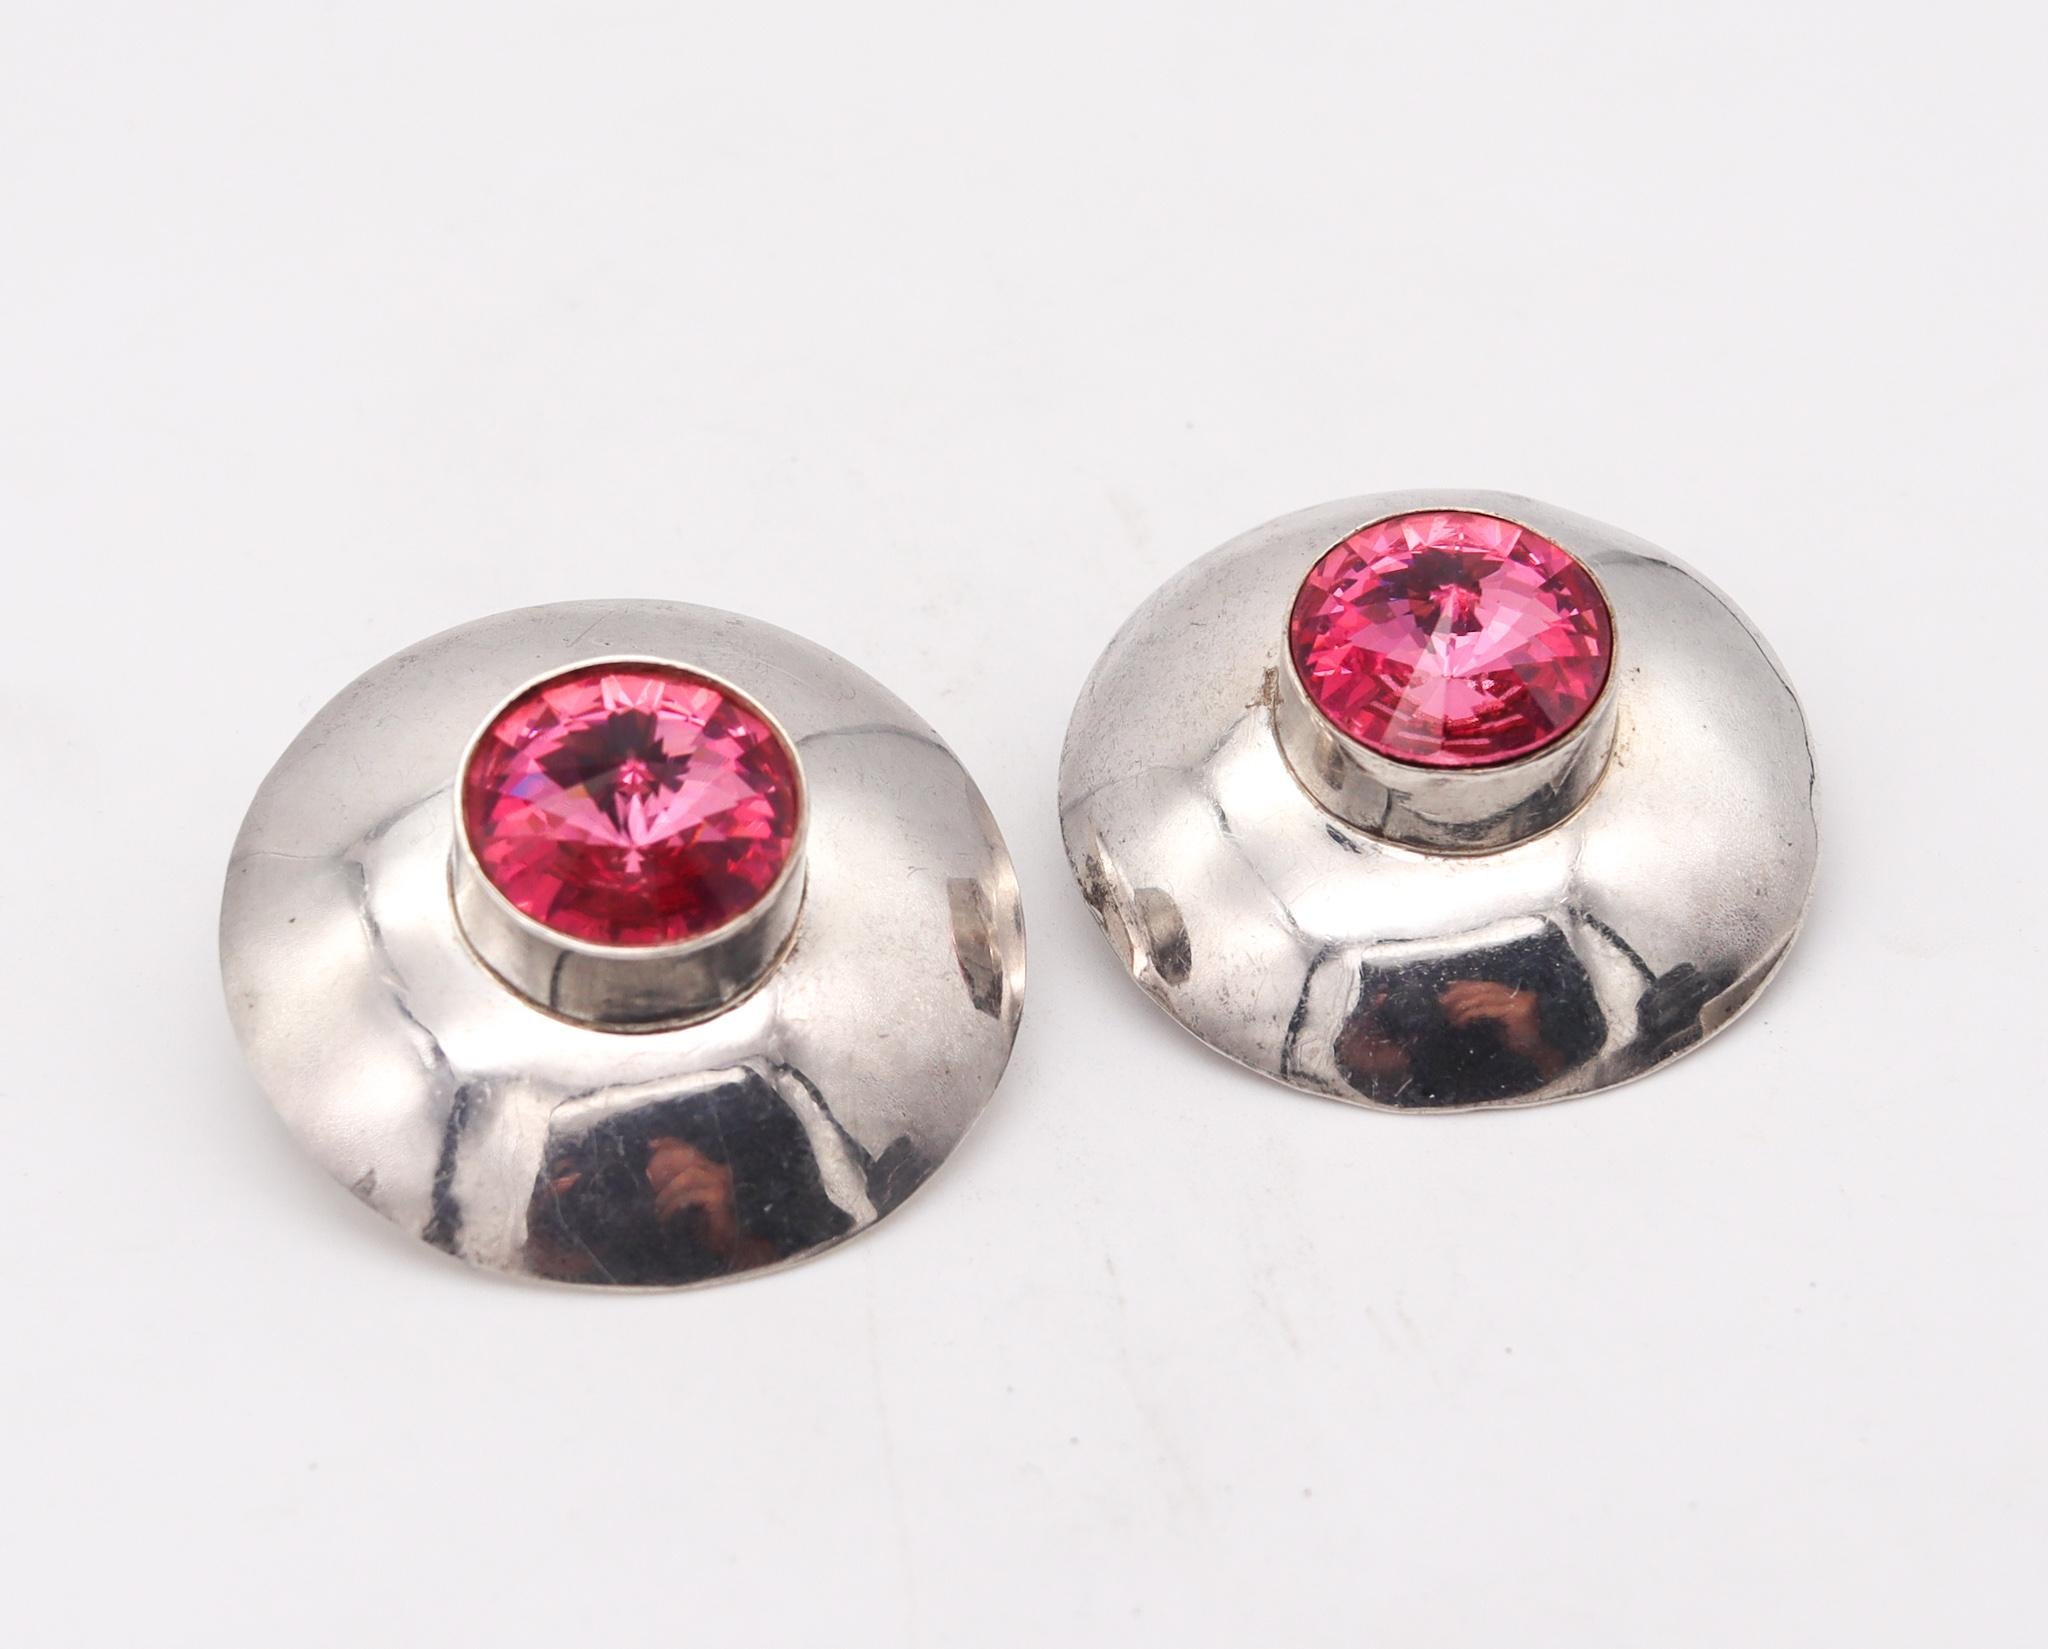 Brilliant Cut Mexico 1970 Taxco Retro Modernist Earrings In Sterling Silver With Pink Faceted  For Sale